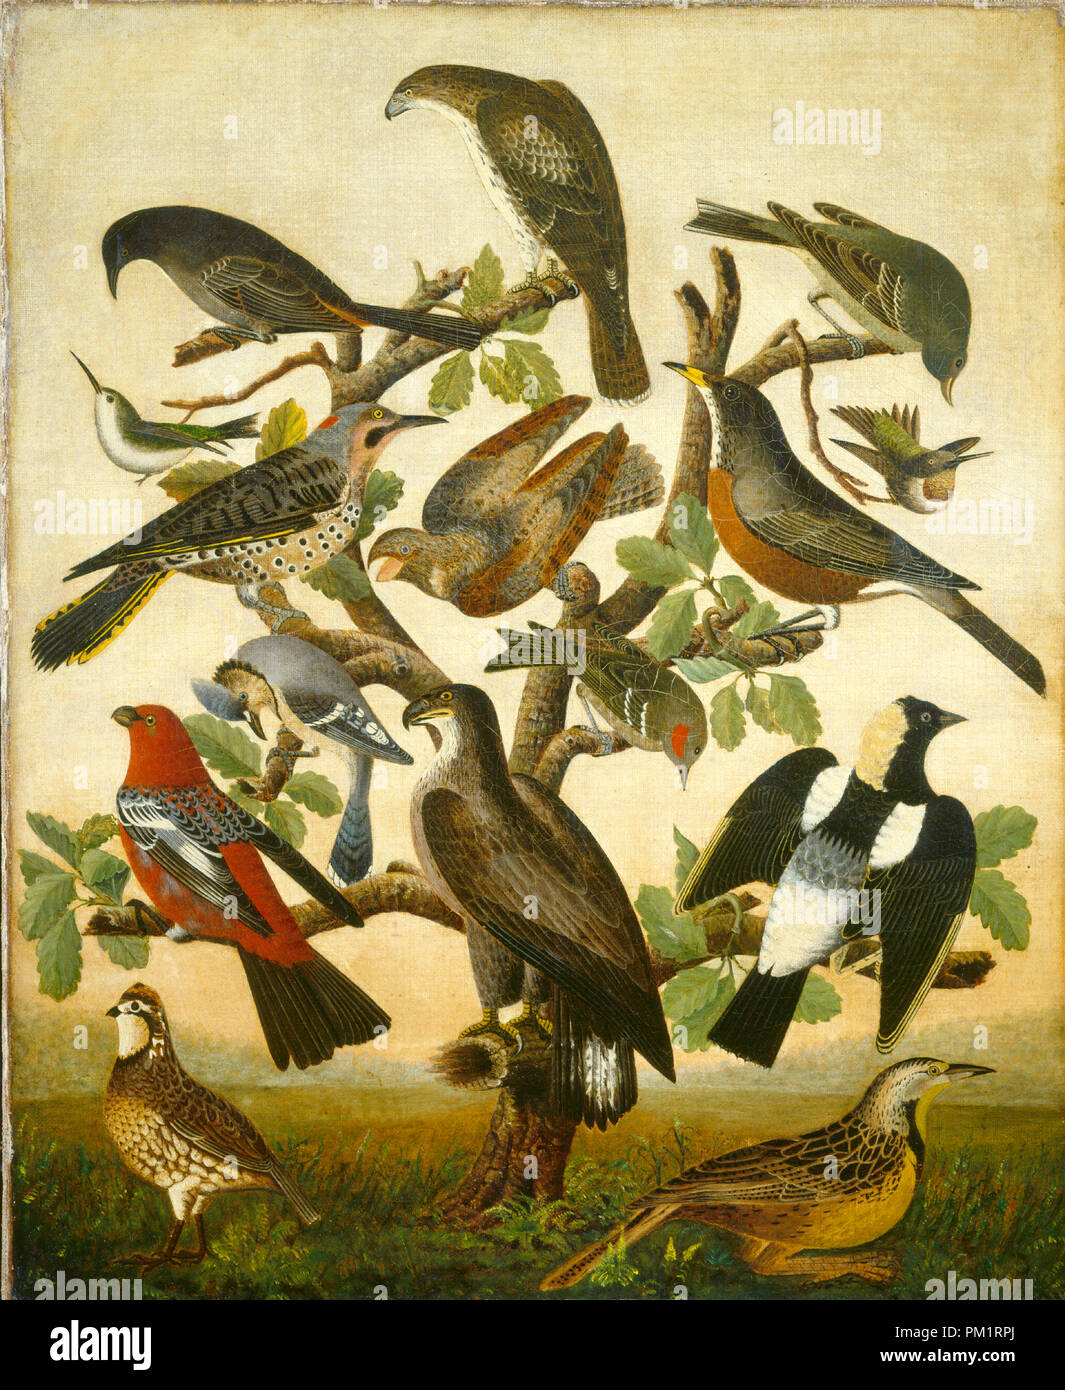 Birds. Dated: c. 1840. Dimensions: overall: 43.1 x 35.5 cm (16 15/16 x 14 in.)  framed: 53 x 45.4 x 2.8 cm (20 7/8 x 17 7/8 x 1 1/8 in.). Medium: oil on canvas. Museum: National Gallery of Art, Washington DC. Author: American 19th Century. Stock Photo